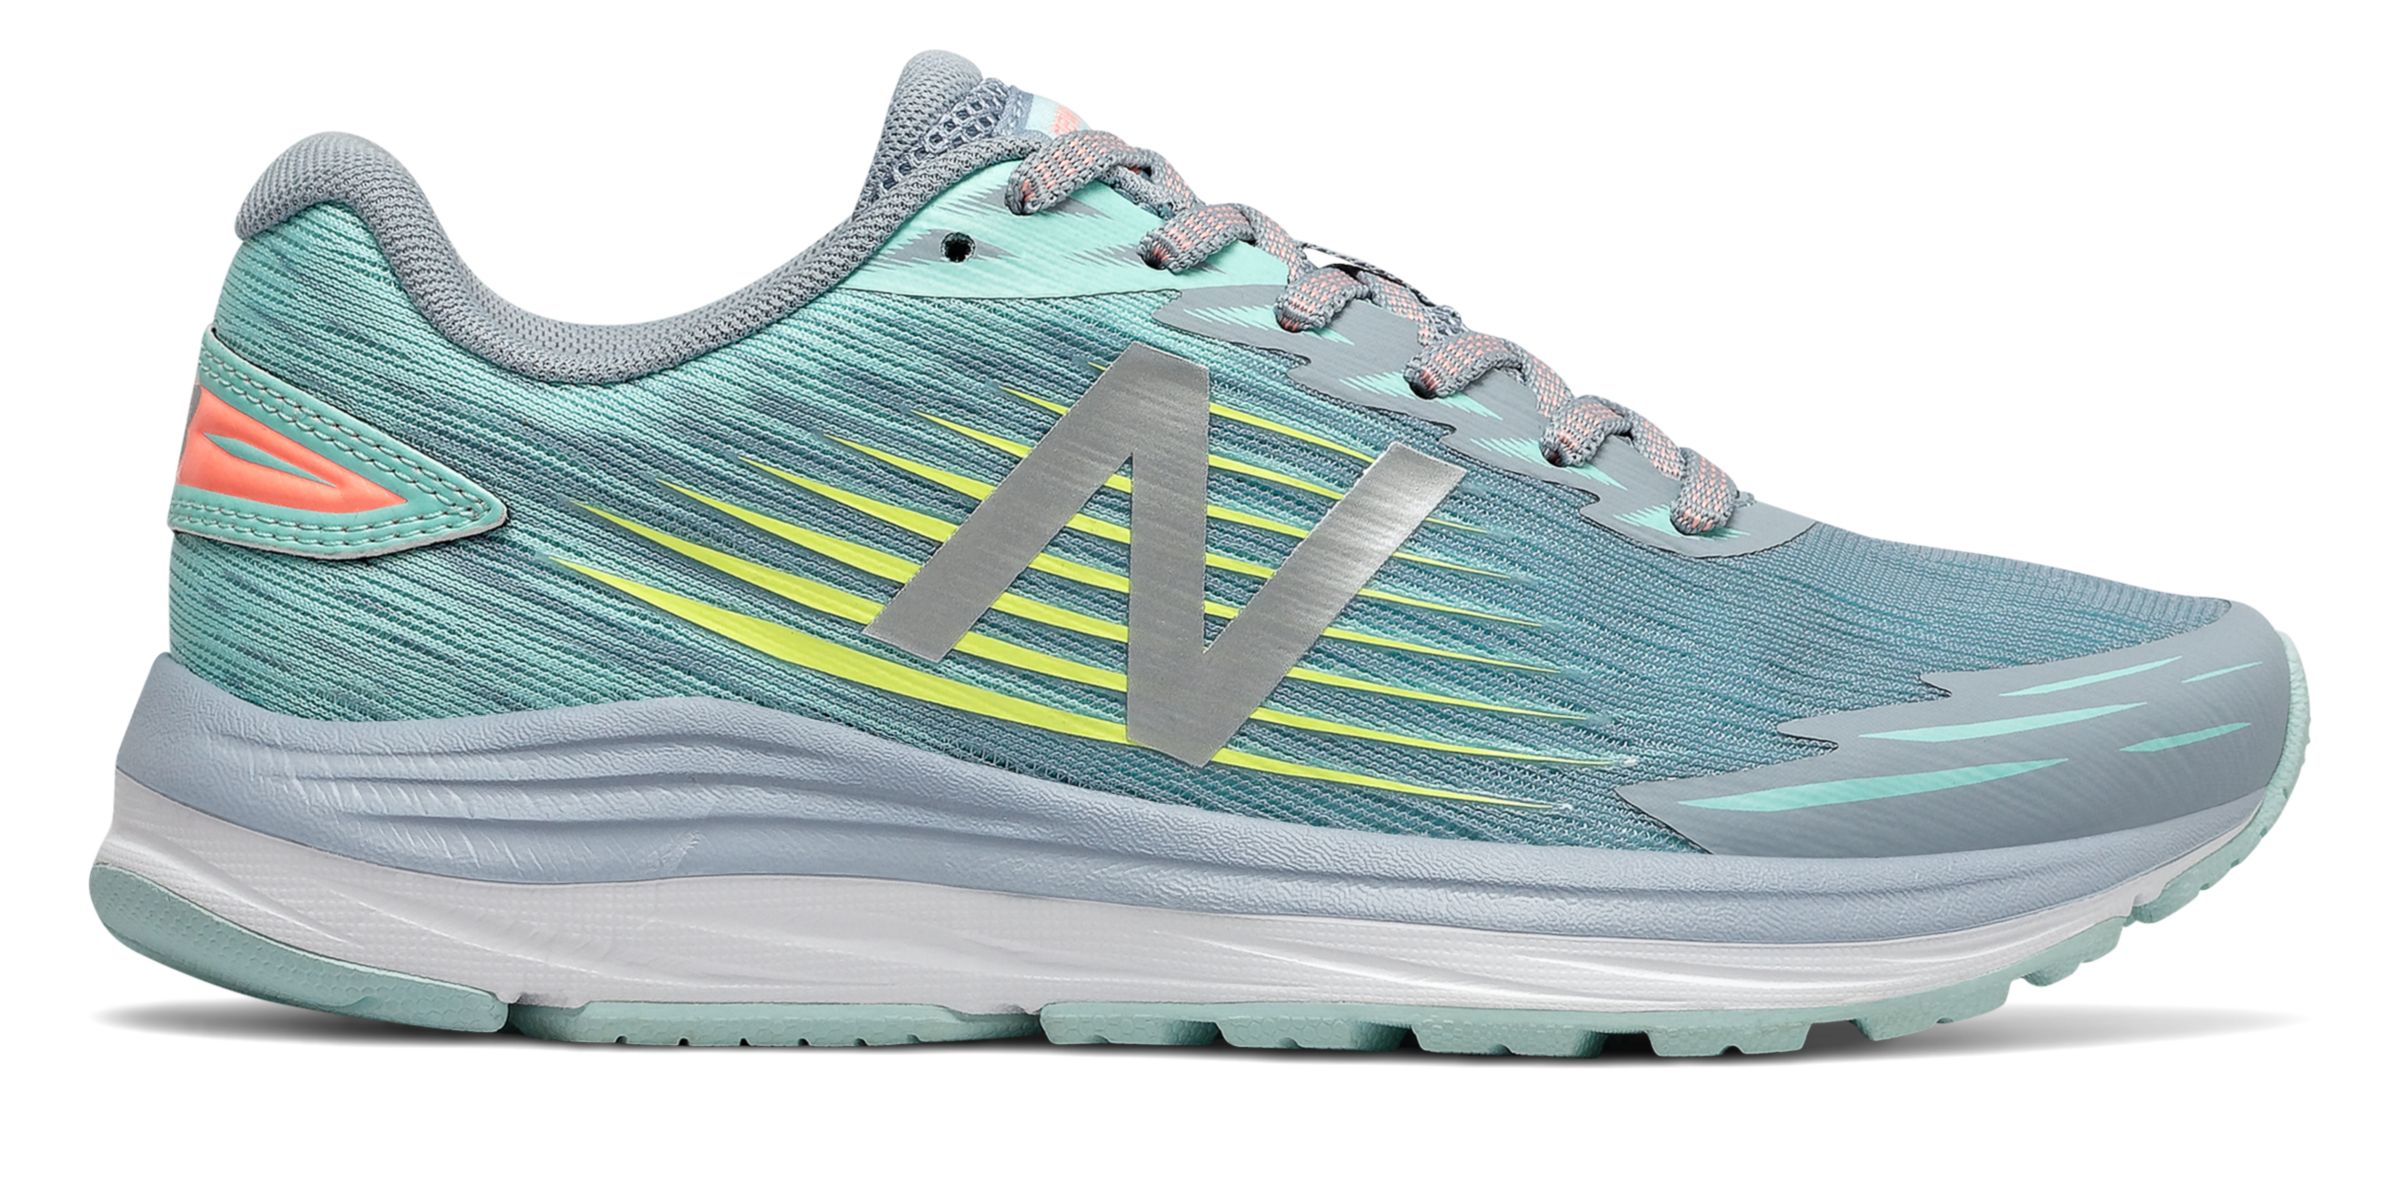 Women's Synact Running Shoes - New Balance